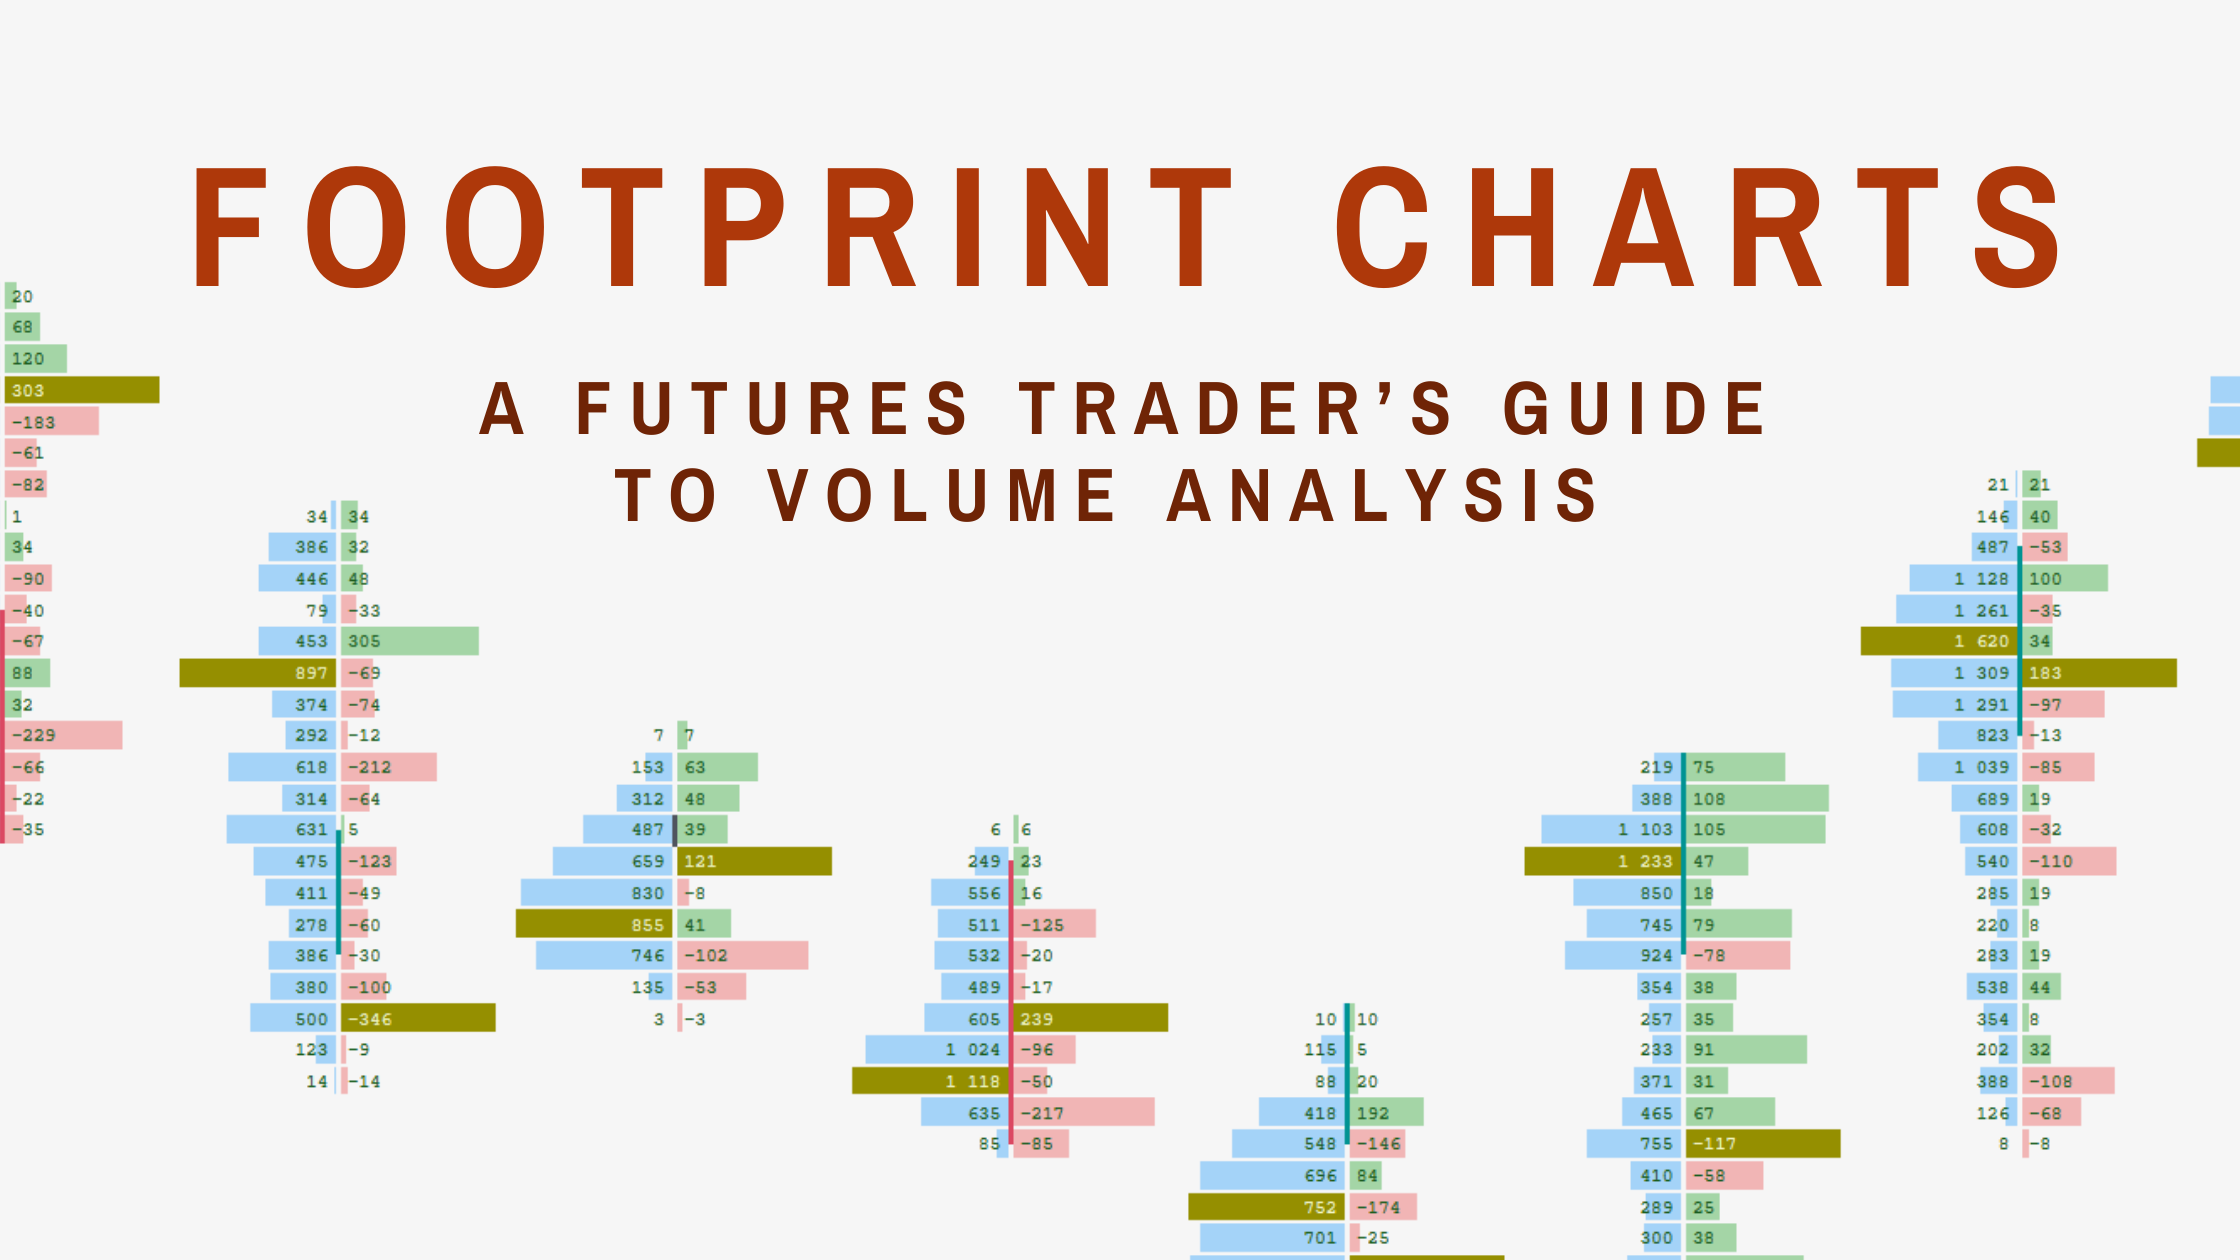 Footprint Charts A Futures Trader s Guide to Volume Analysis